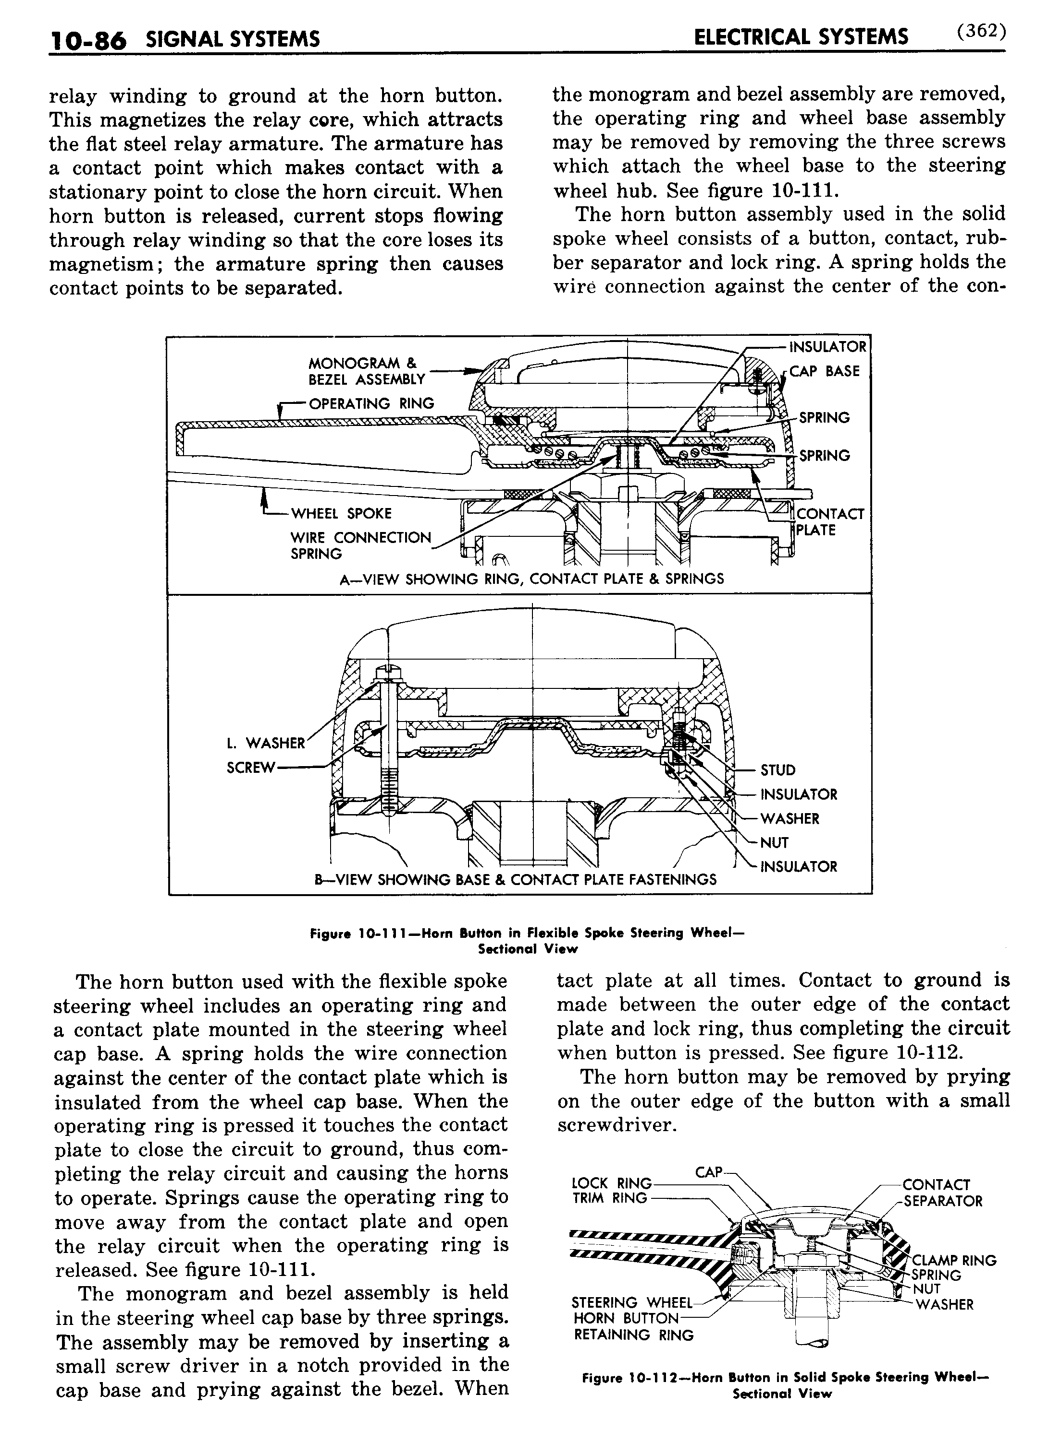 n_11 1948 Buick Shop Manual - Electrical Systems-086-086.jpg